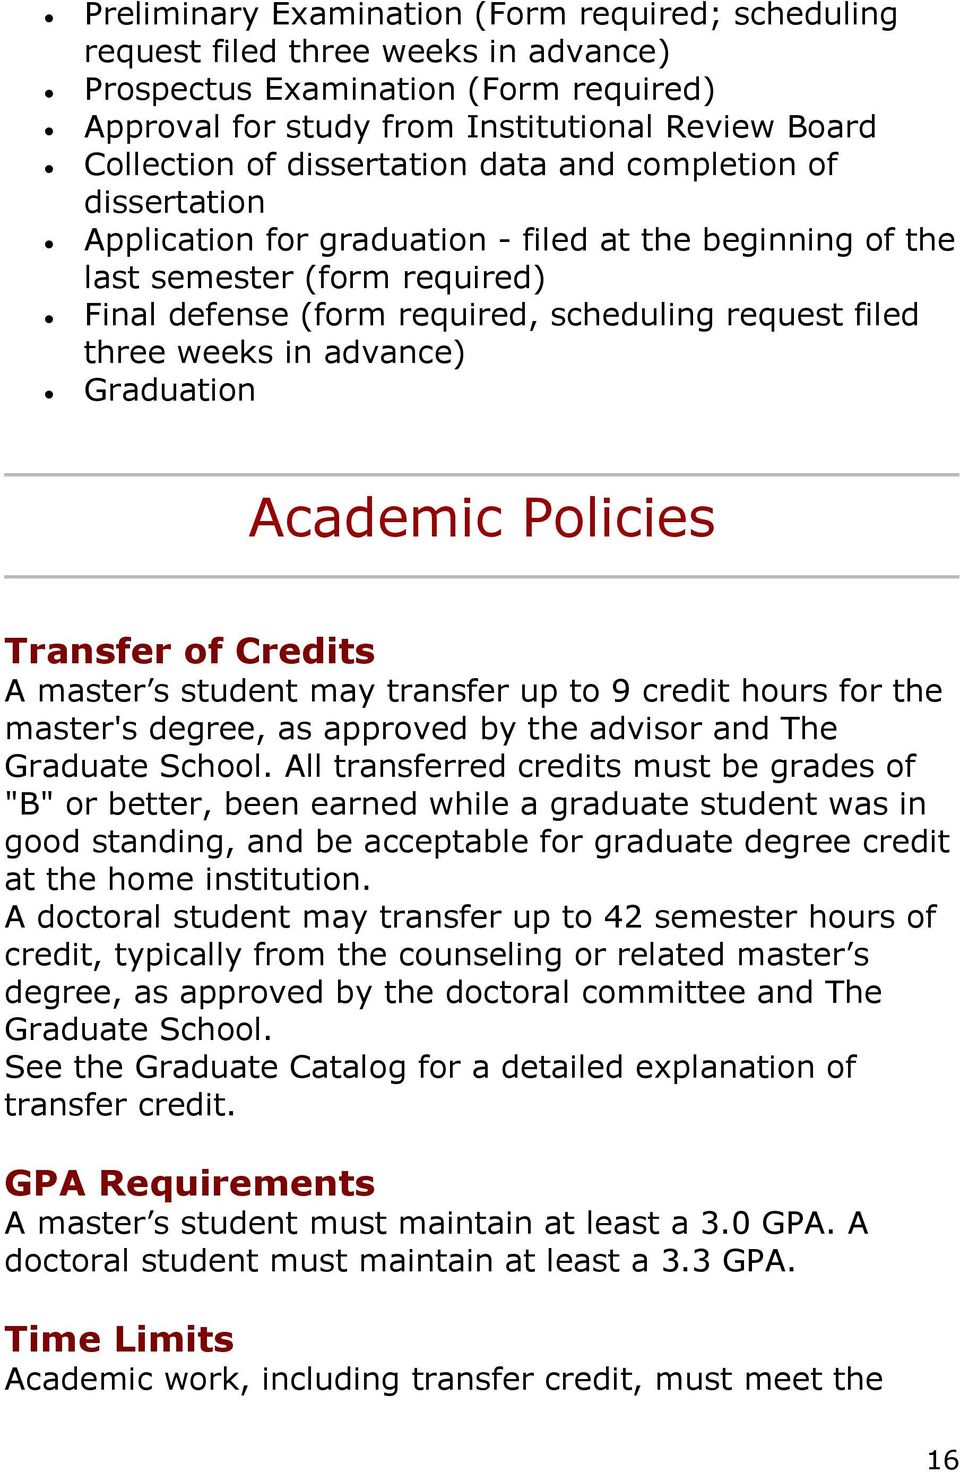 weeks in advance) Graduation Academic Policies Transfer of Credits A master s student may transfer up to 9 credit hours for the master's degree, as approved by the advisor and The Graduate School.